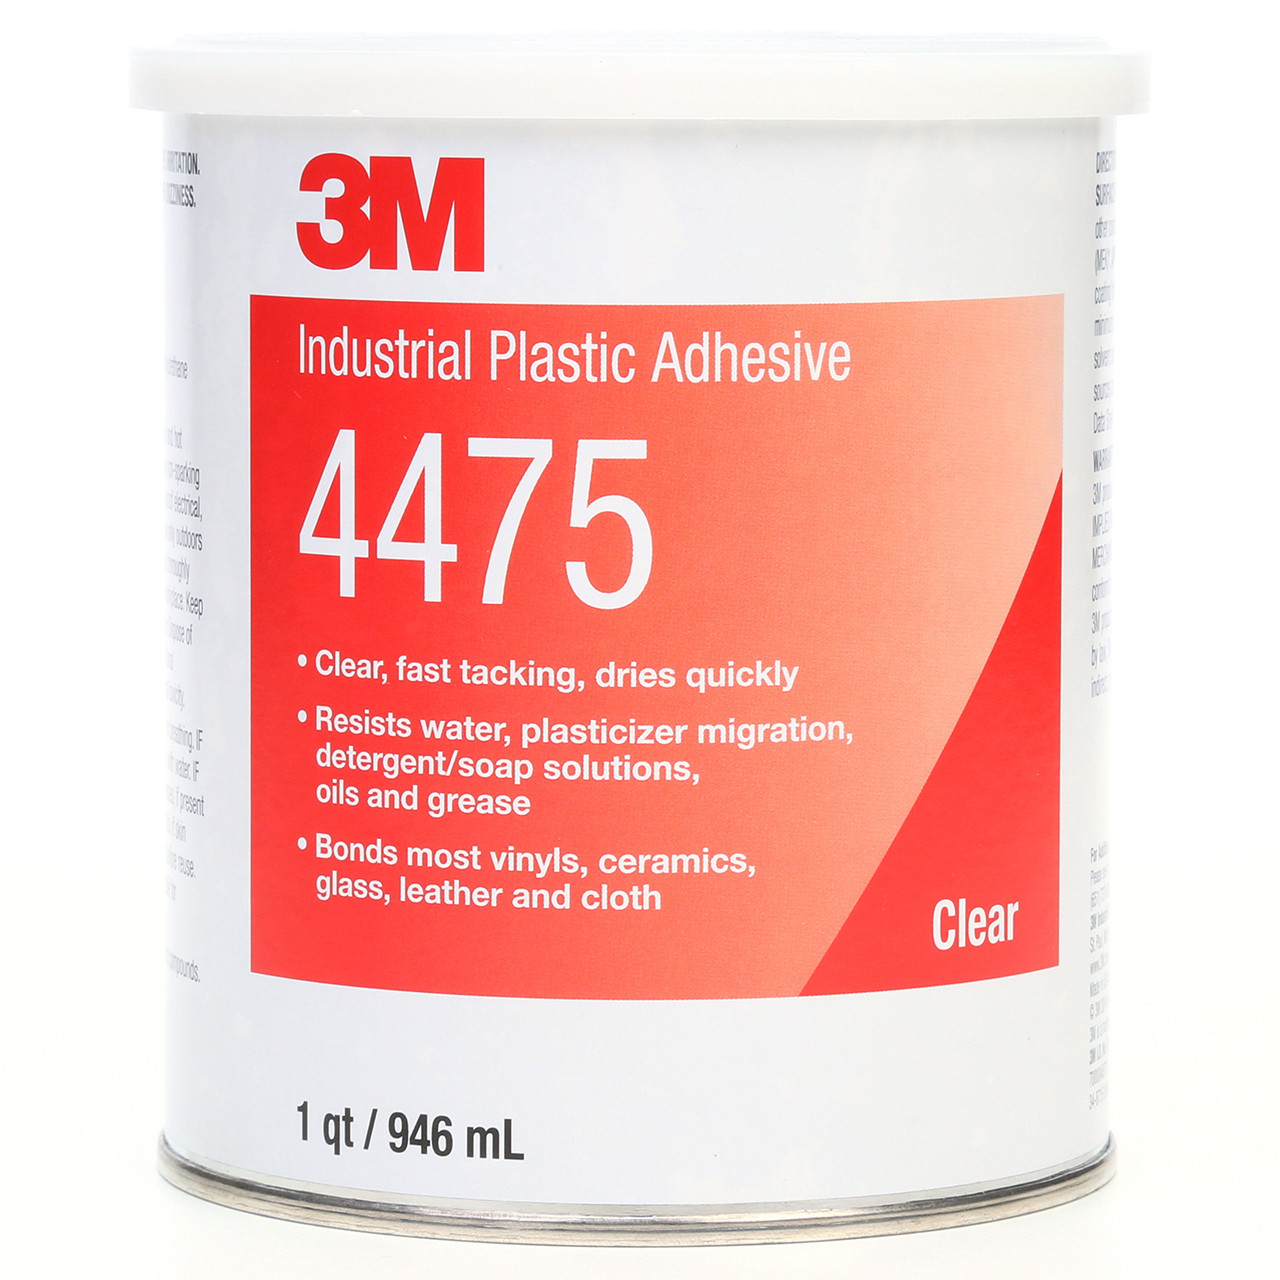 3M Contact Cement, 4693 Series, Amber, 1 qt, Can 4693